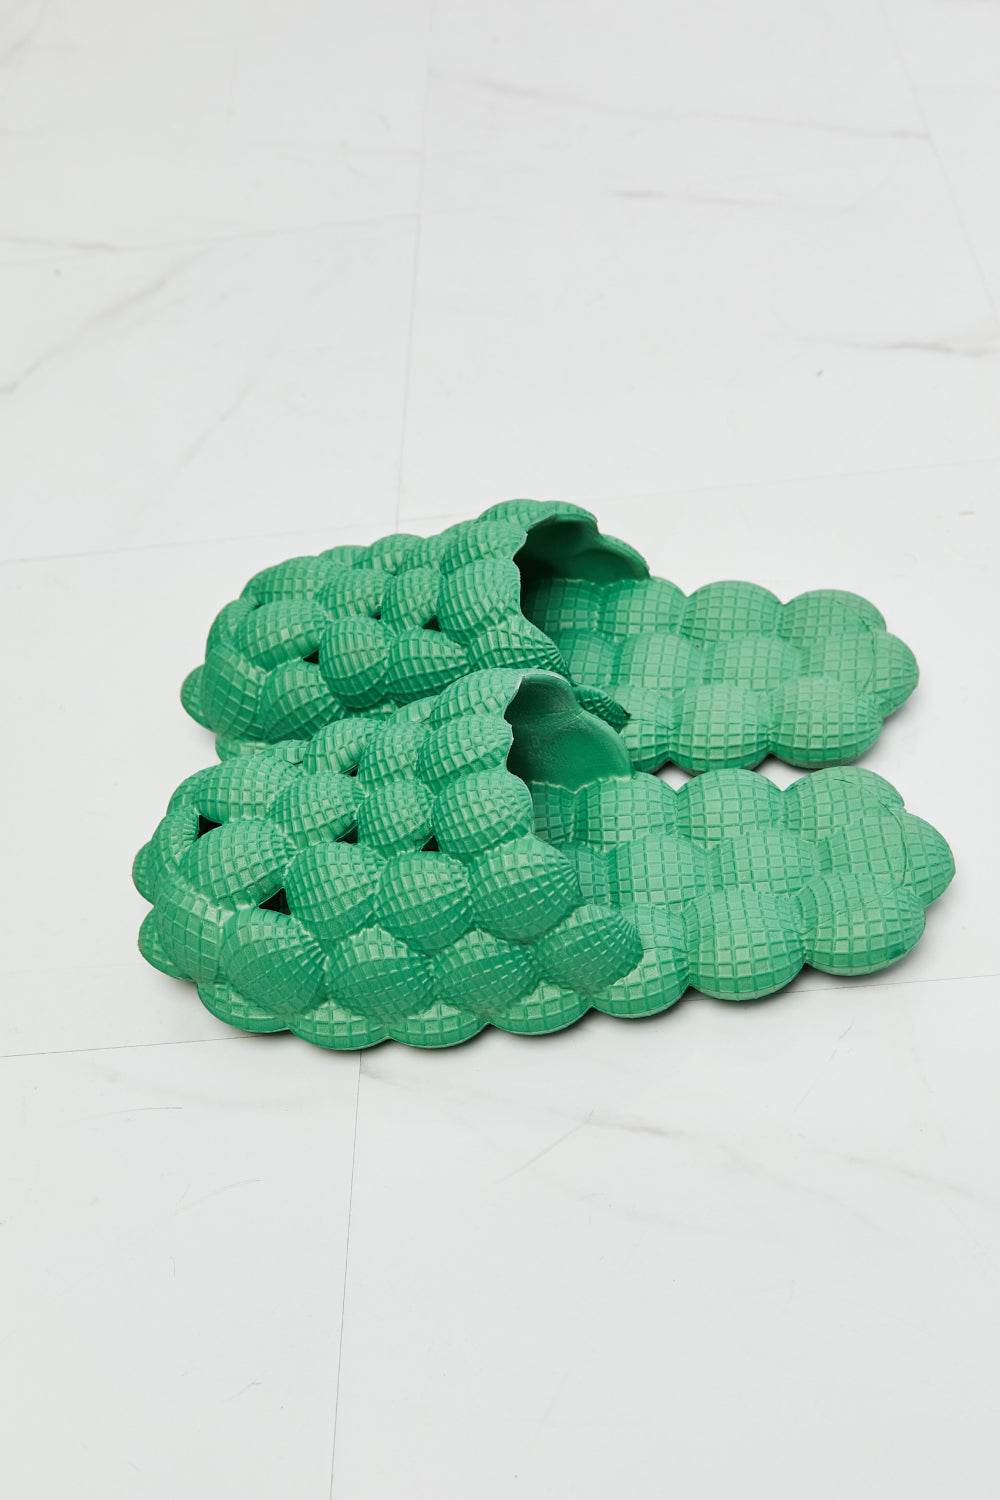 NOOK JOI Laid Back Bubble Slides in Green - BEAUTY COSMOTICS SHOP